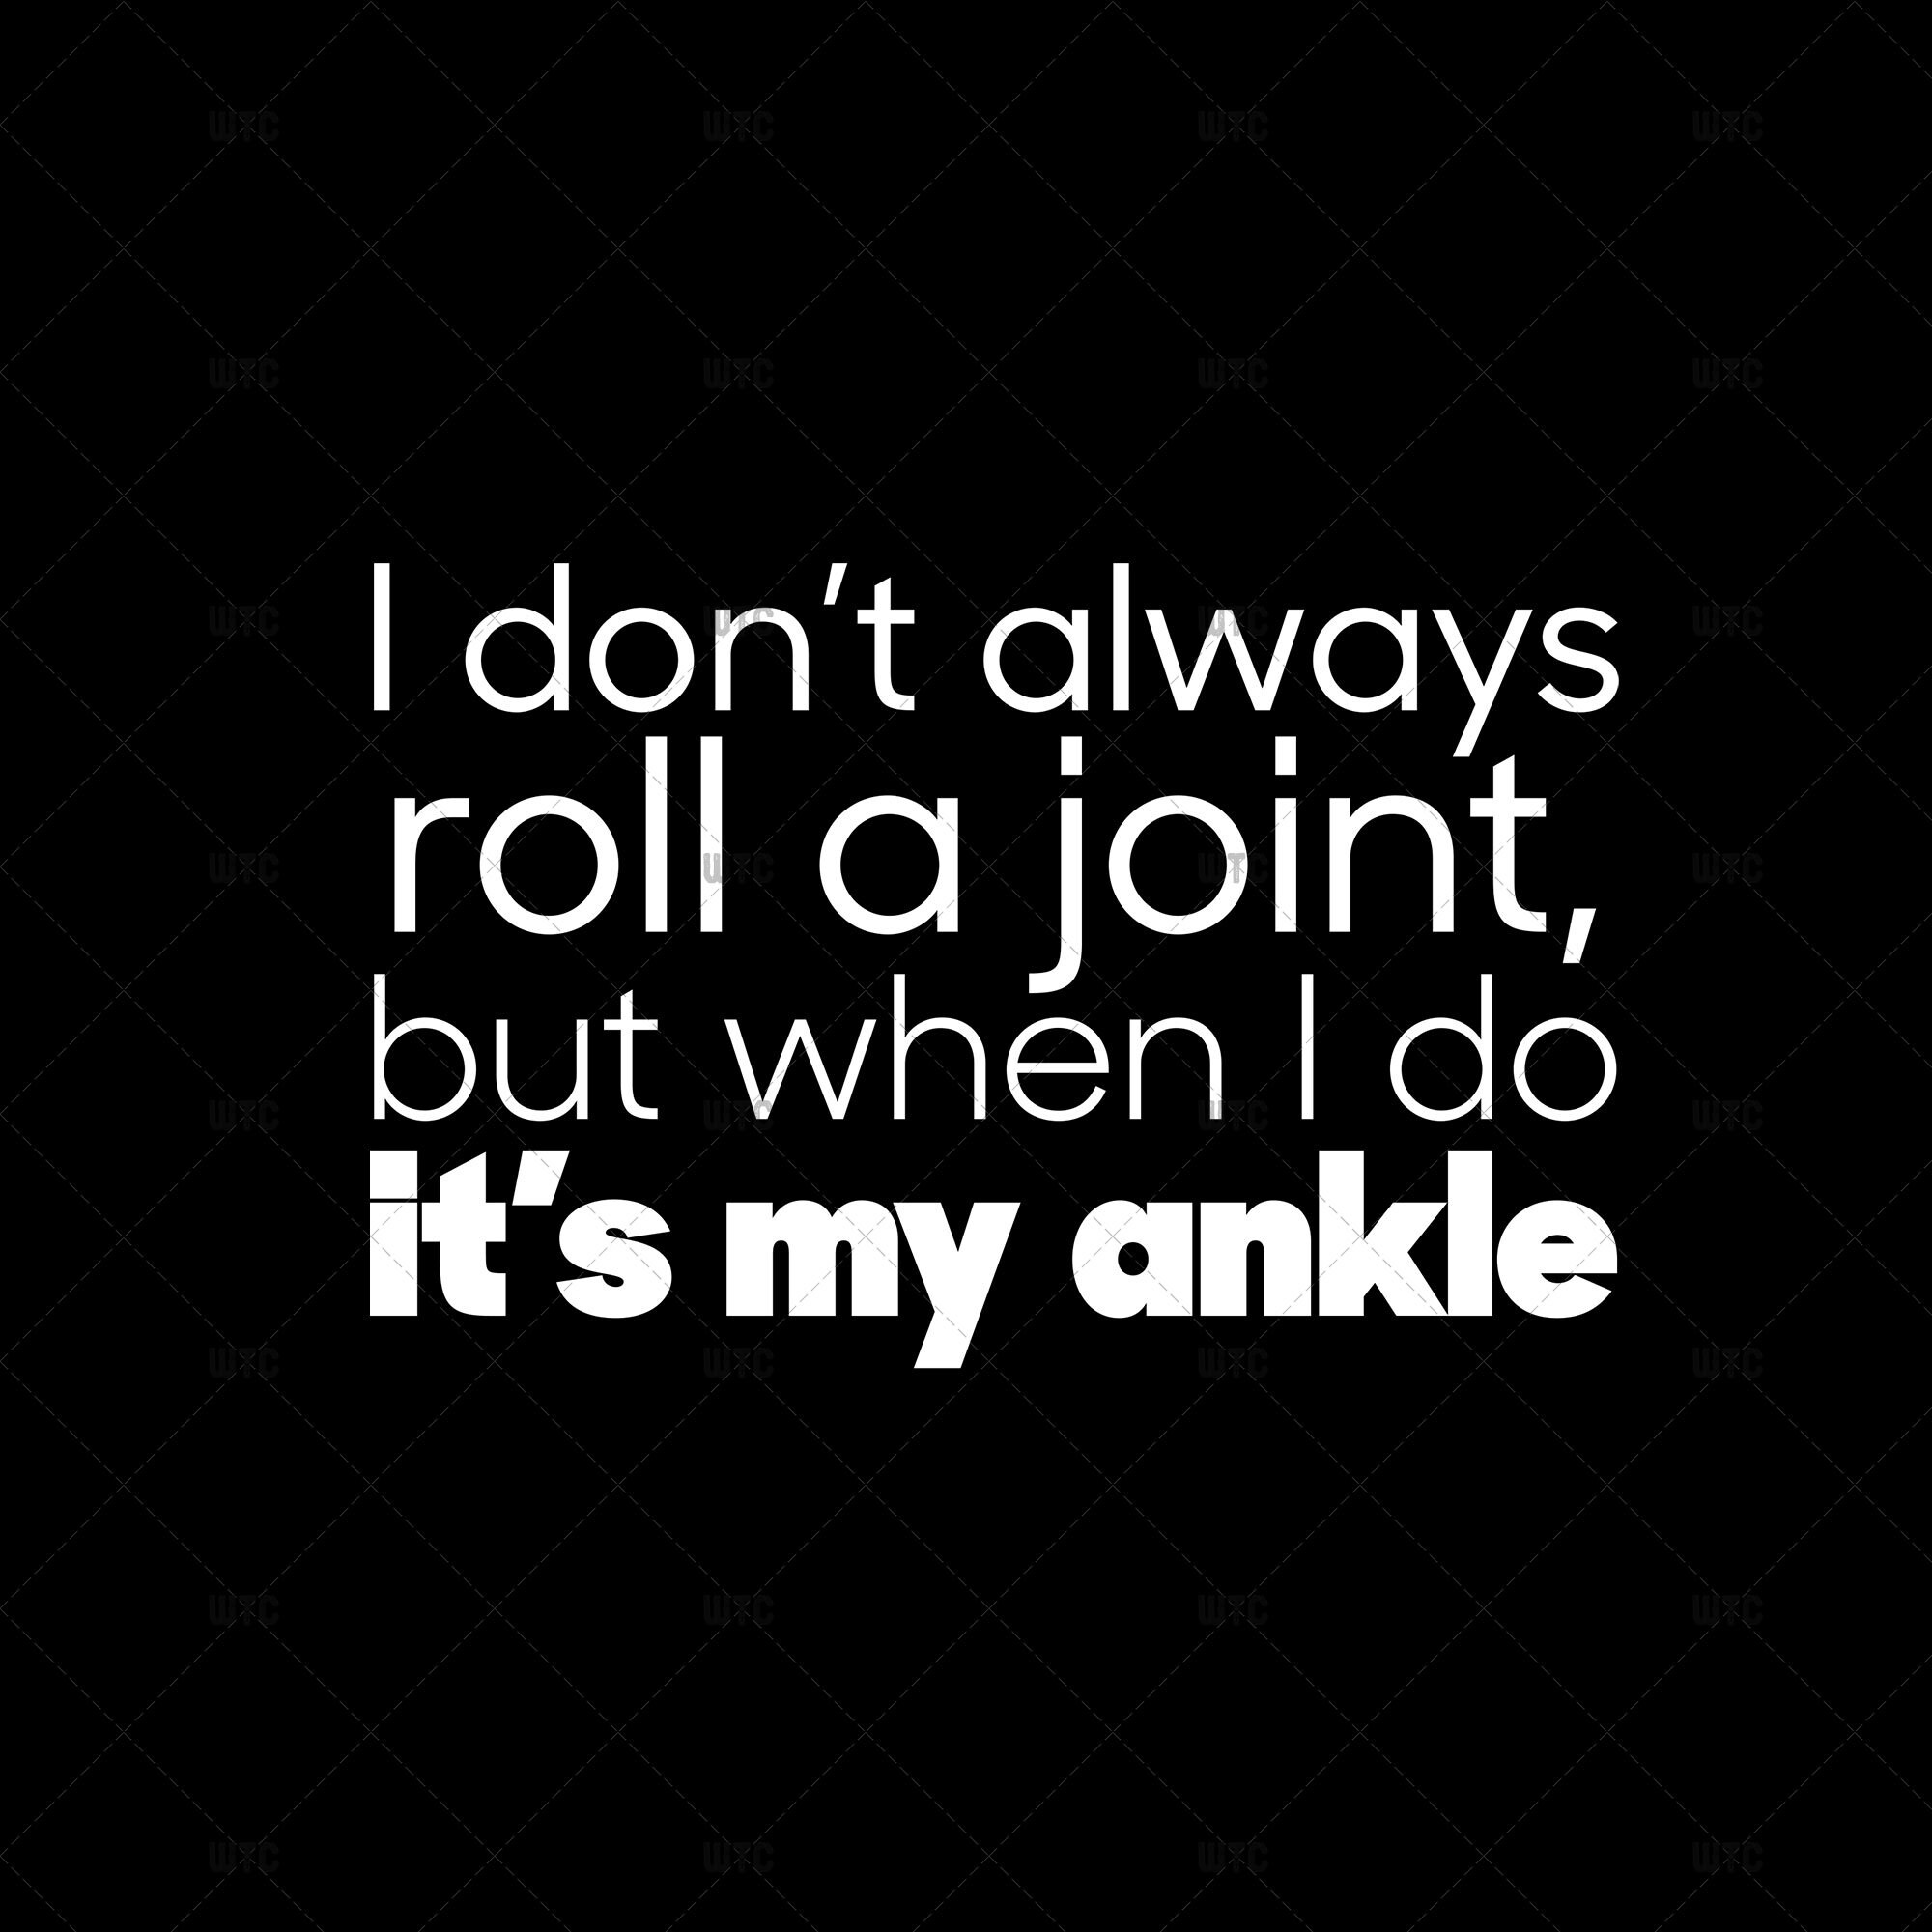 I Don't Always Roll a Joint Funny Shirts Accident Prone - Etsy